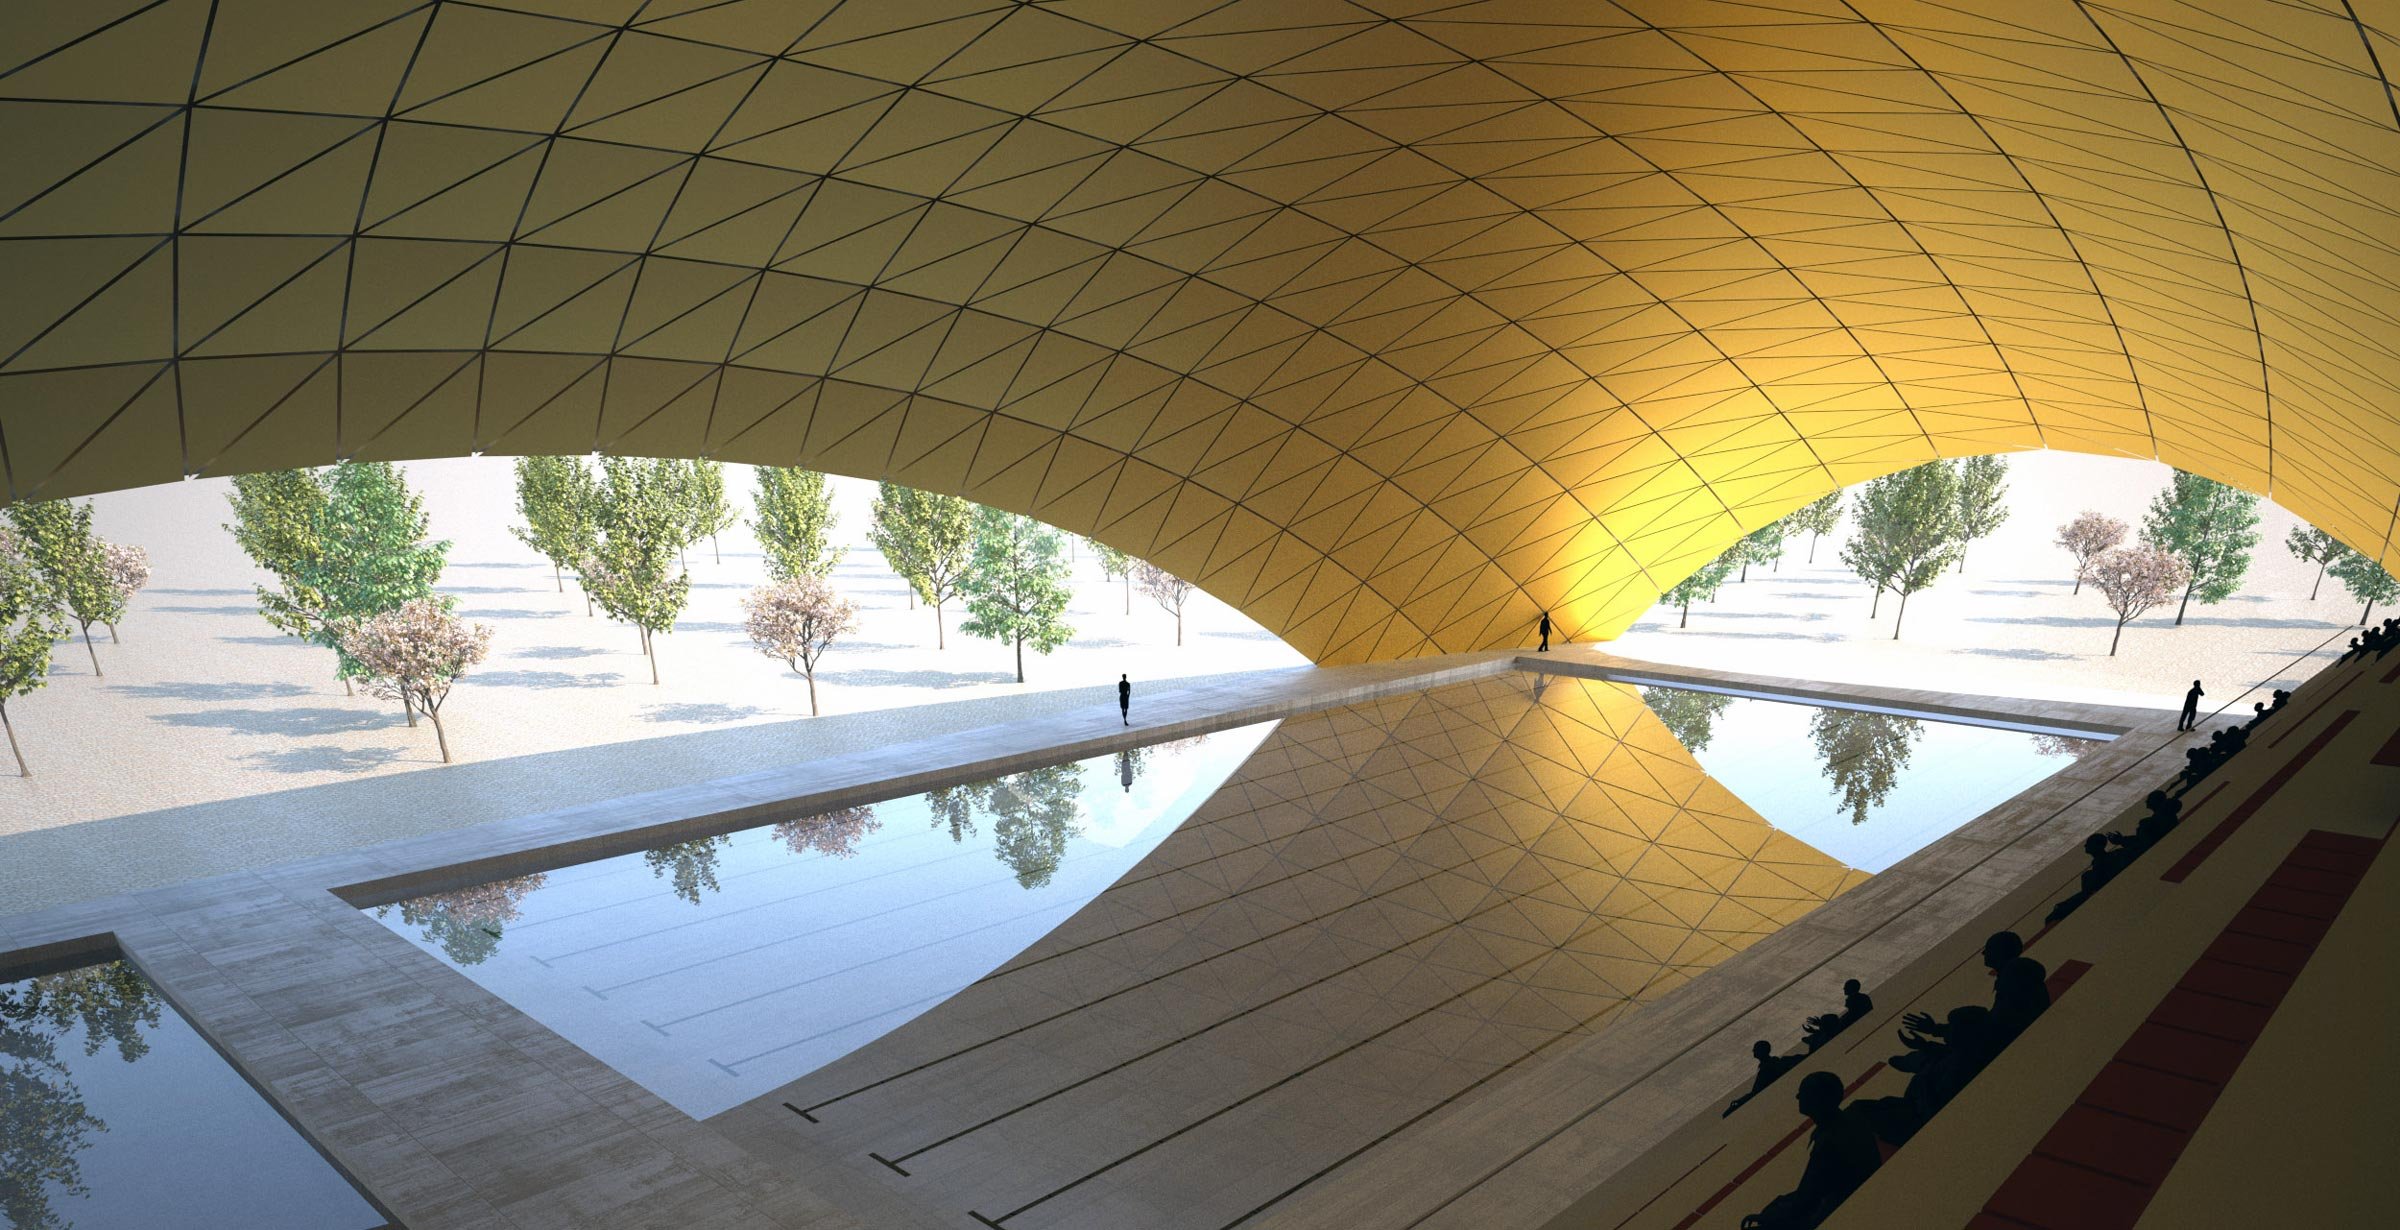 A parametric structural roof with its reflection in still water